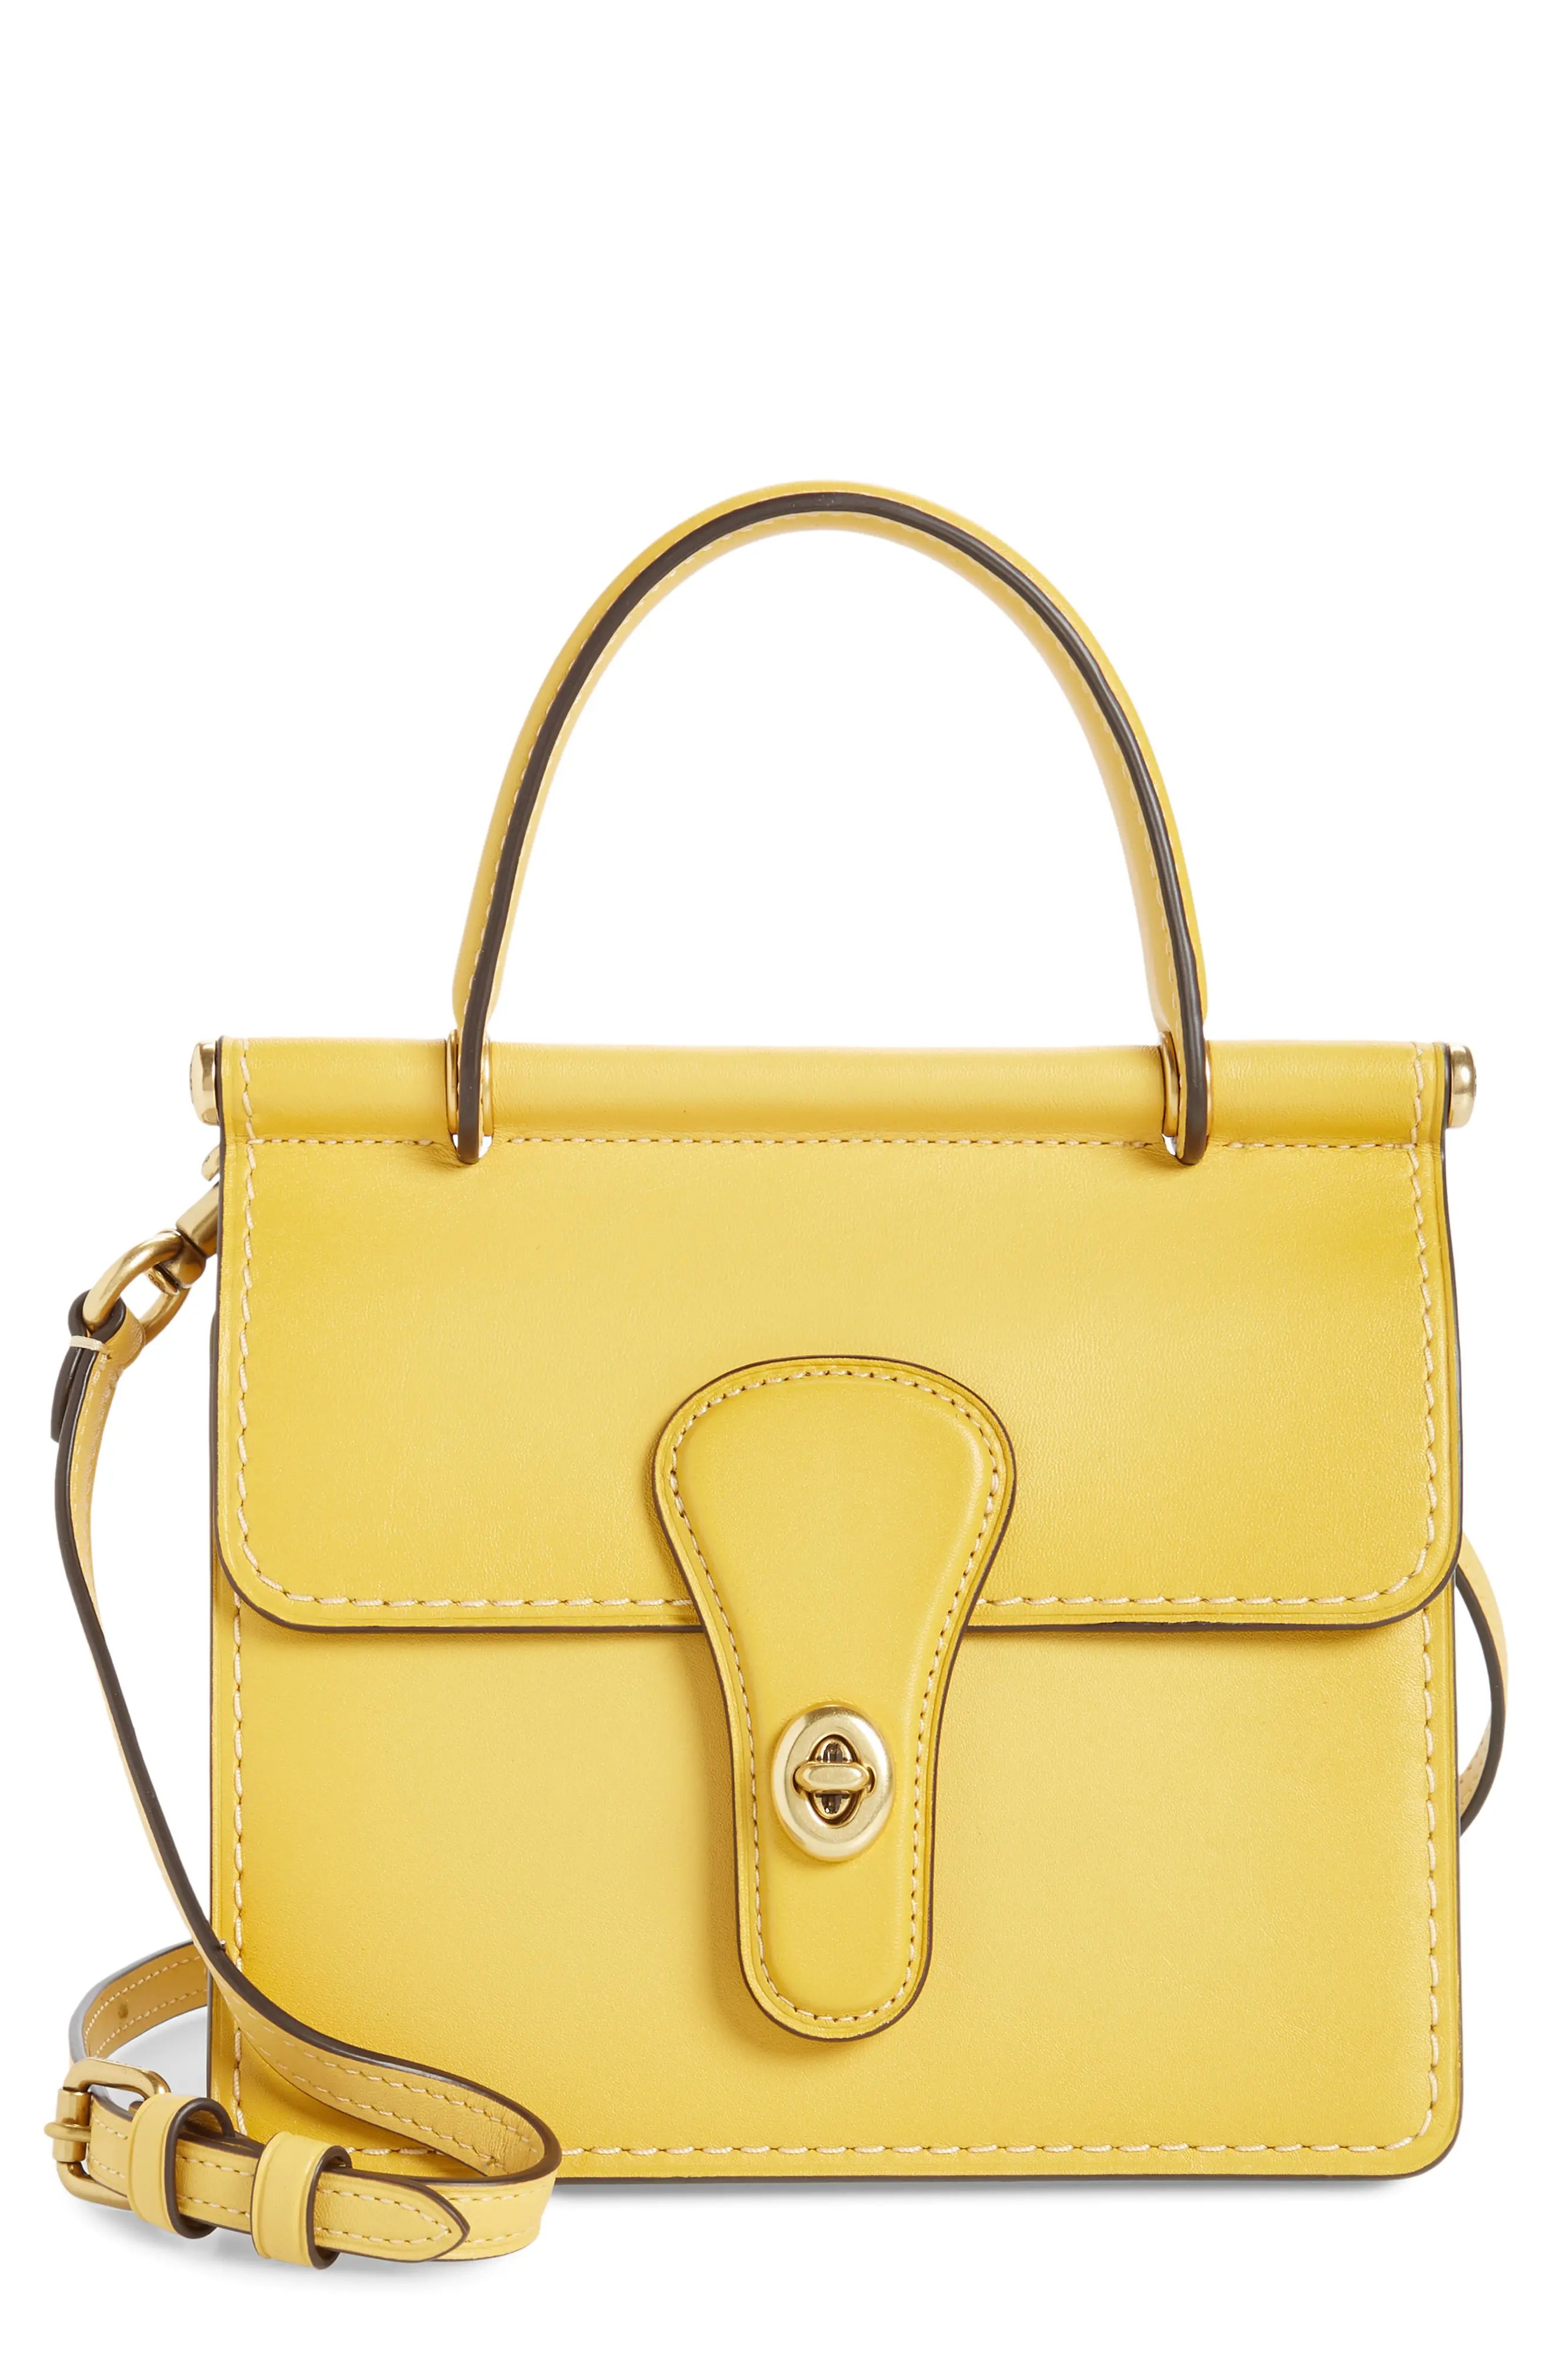 Coach The Coach Originals Willis Leather Top Handle Bag - Yellow | Nordstrom